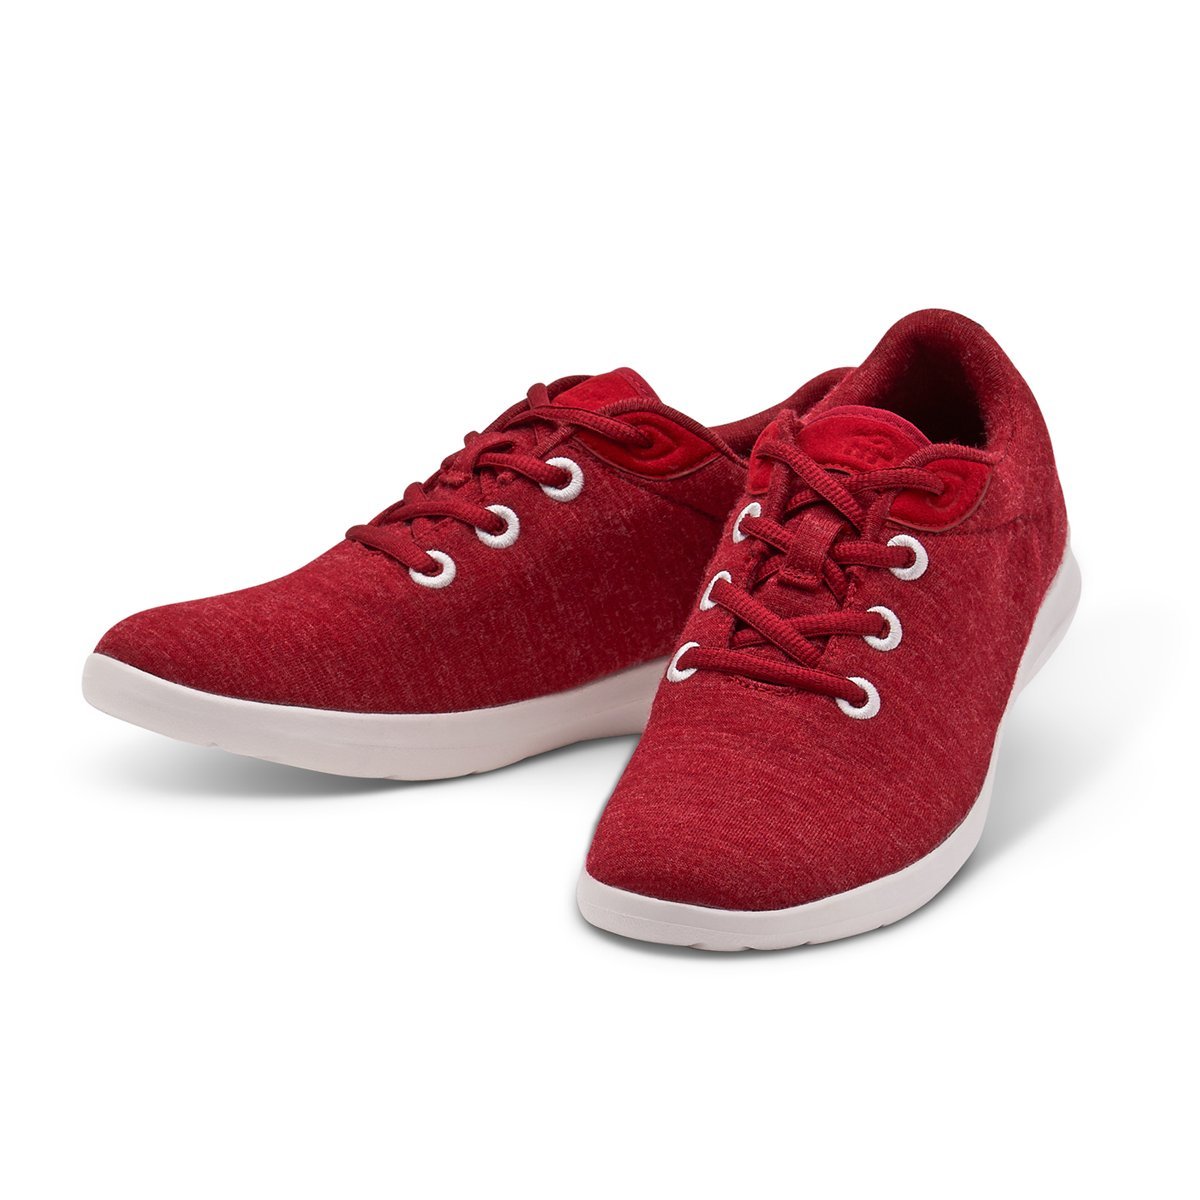 Men's Lace-Ups Maroon - Special Offer